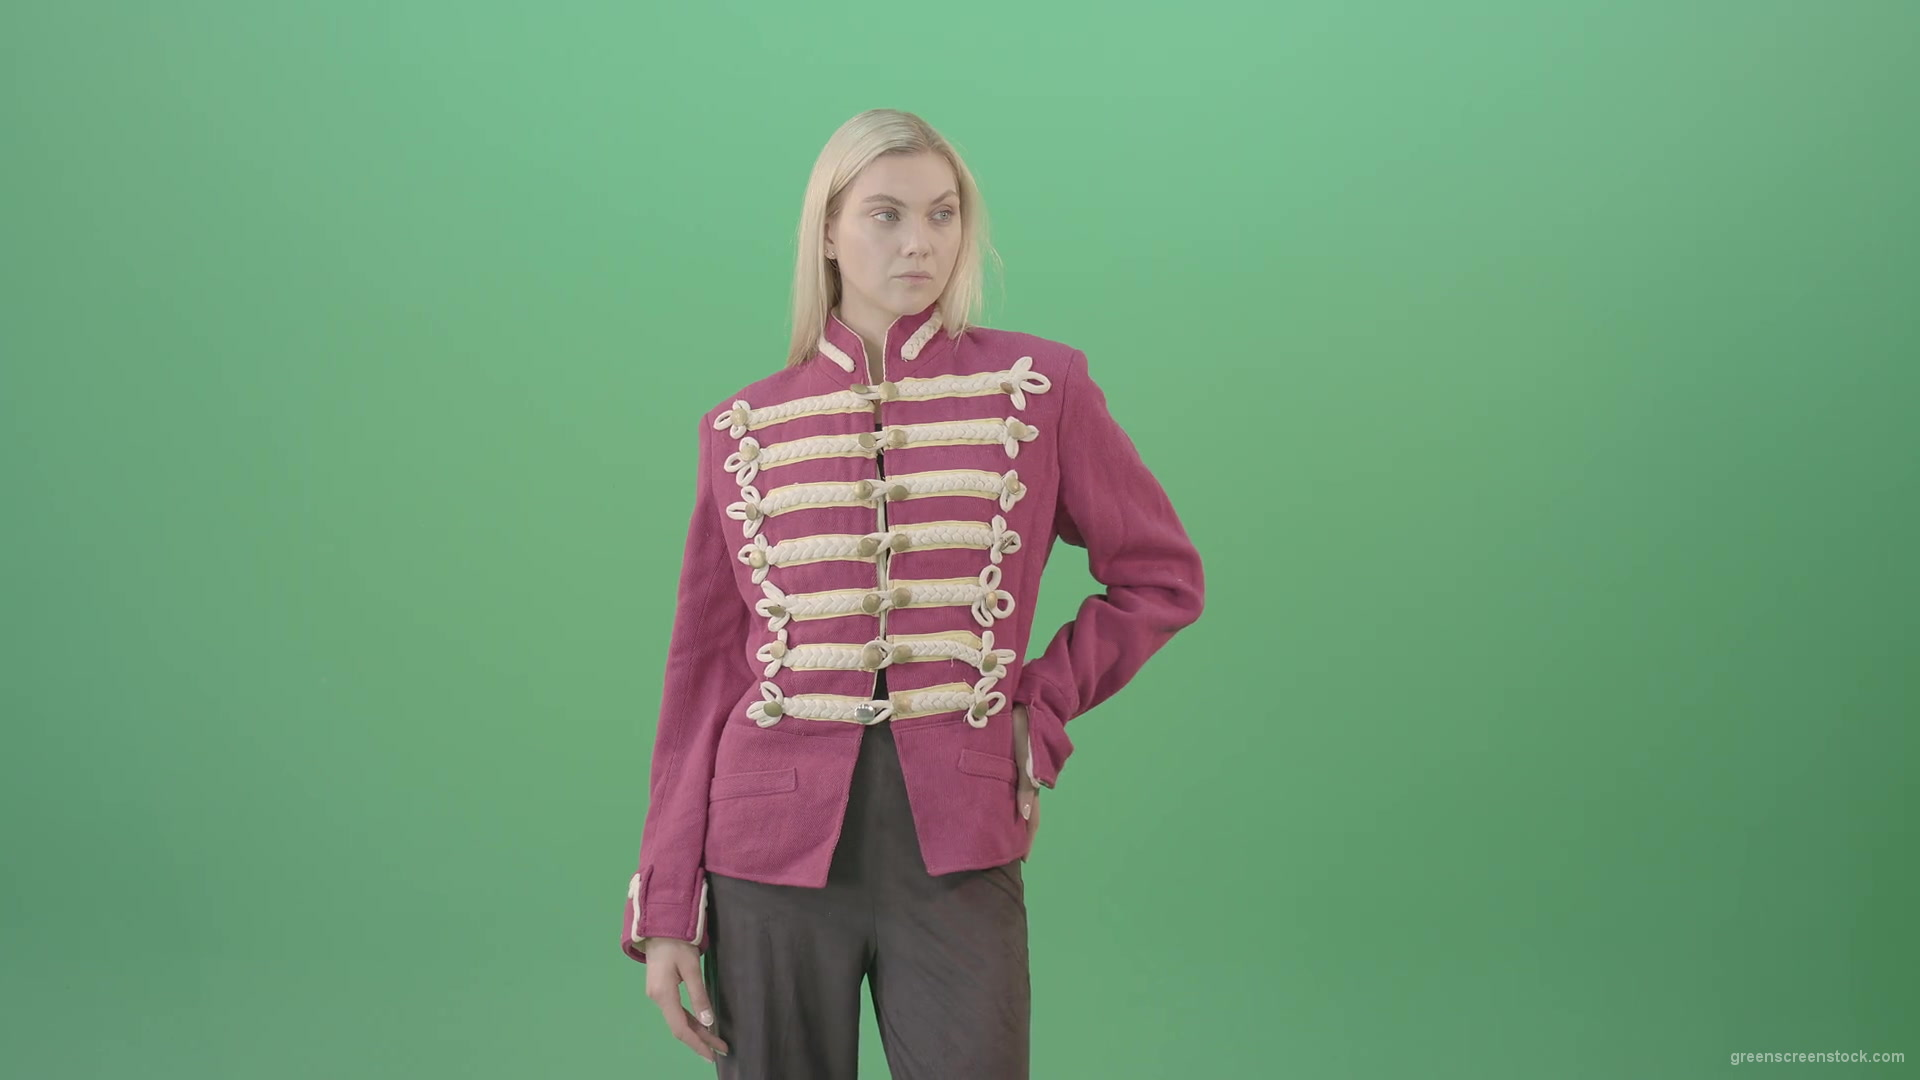 Blonde-Girl-in-Imperial-Royal-uniform-posing-and-shows-photomodel-gestures-isolated-on-Green-Screen-4K-Video-Footage-1920_004 Green Screen Stock